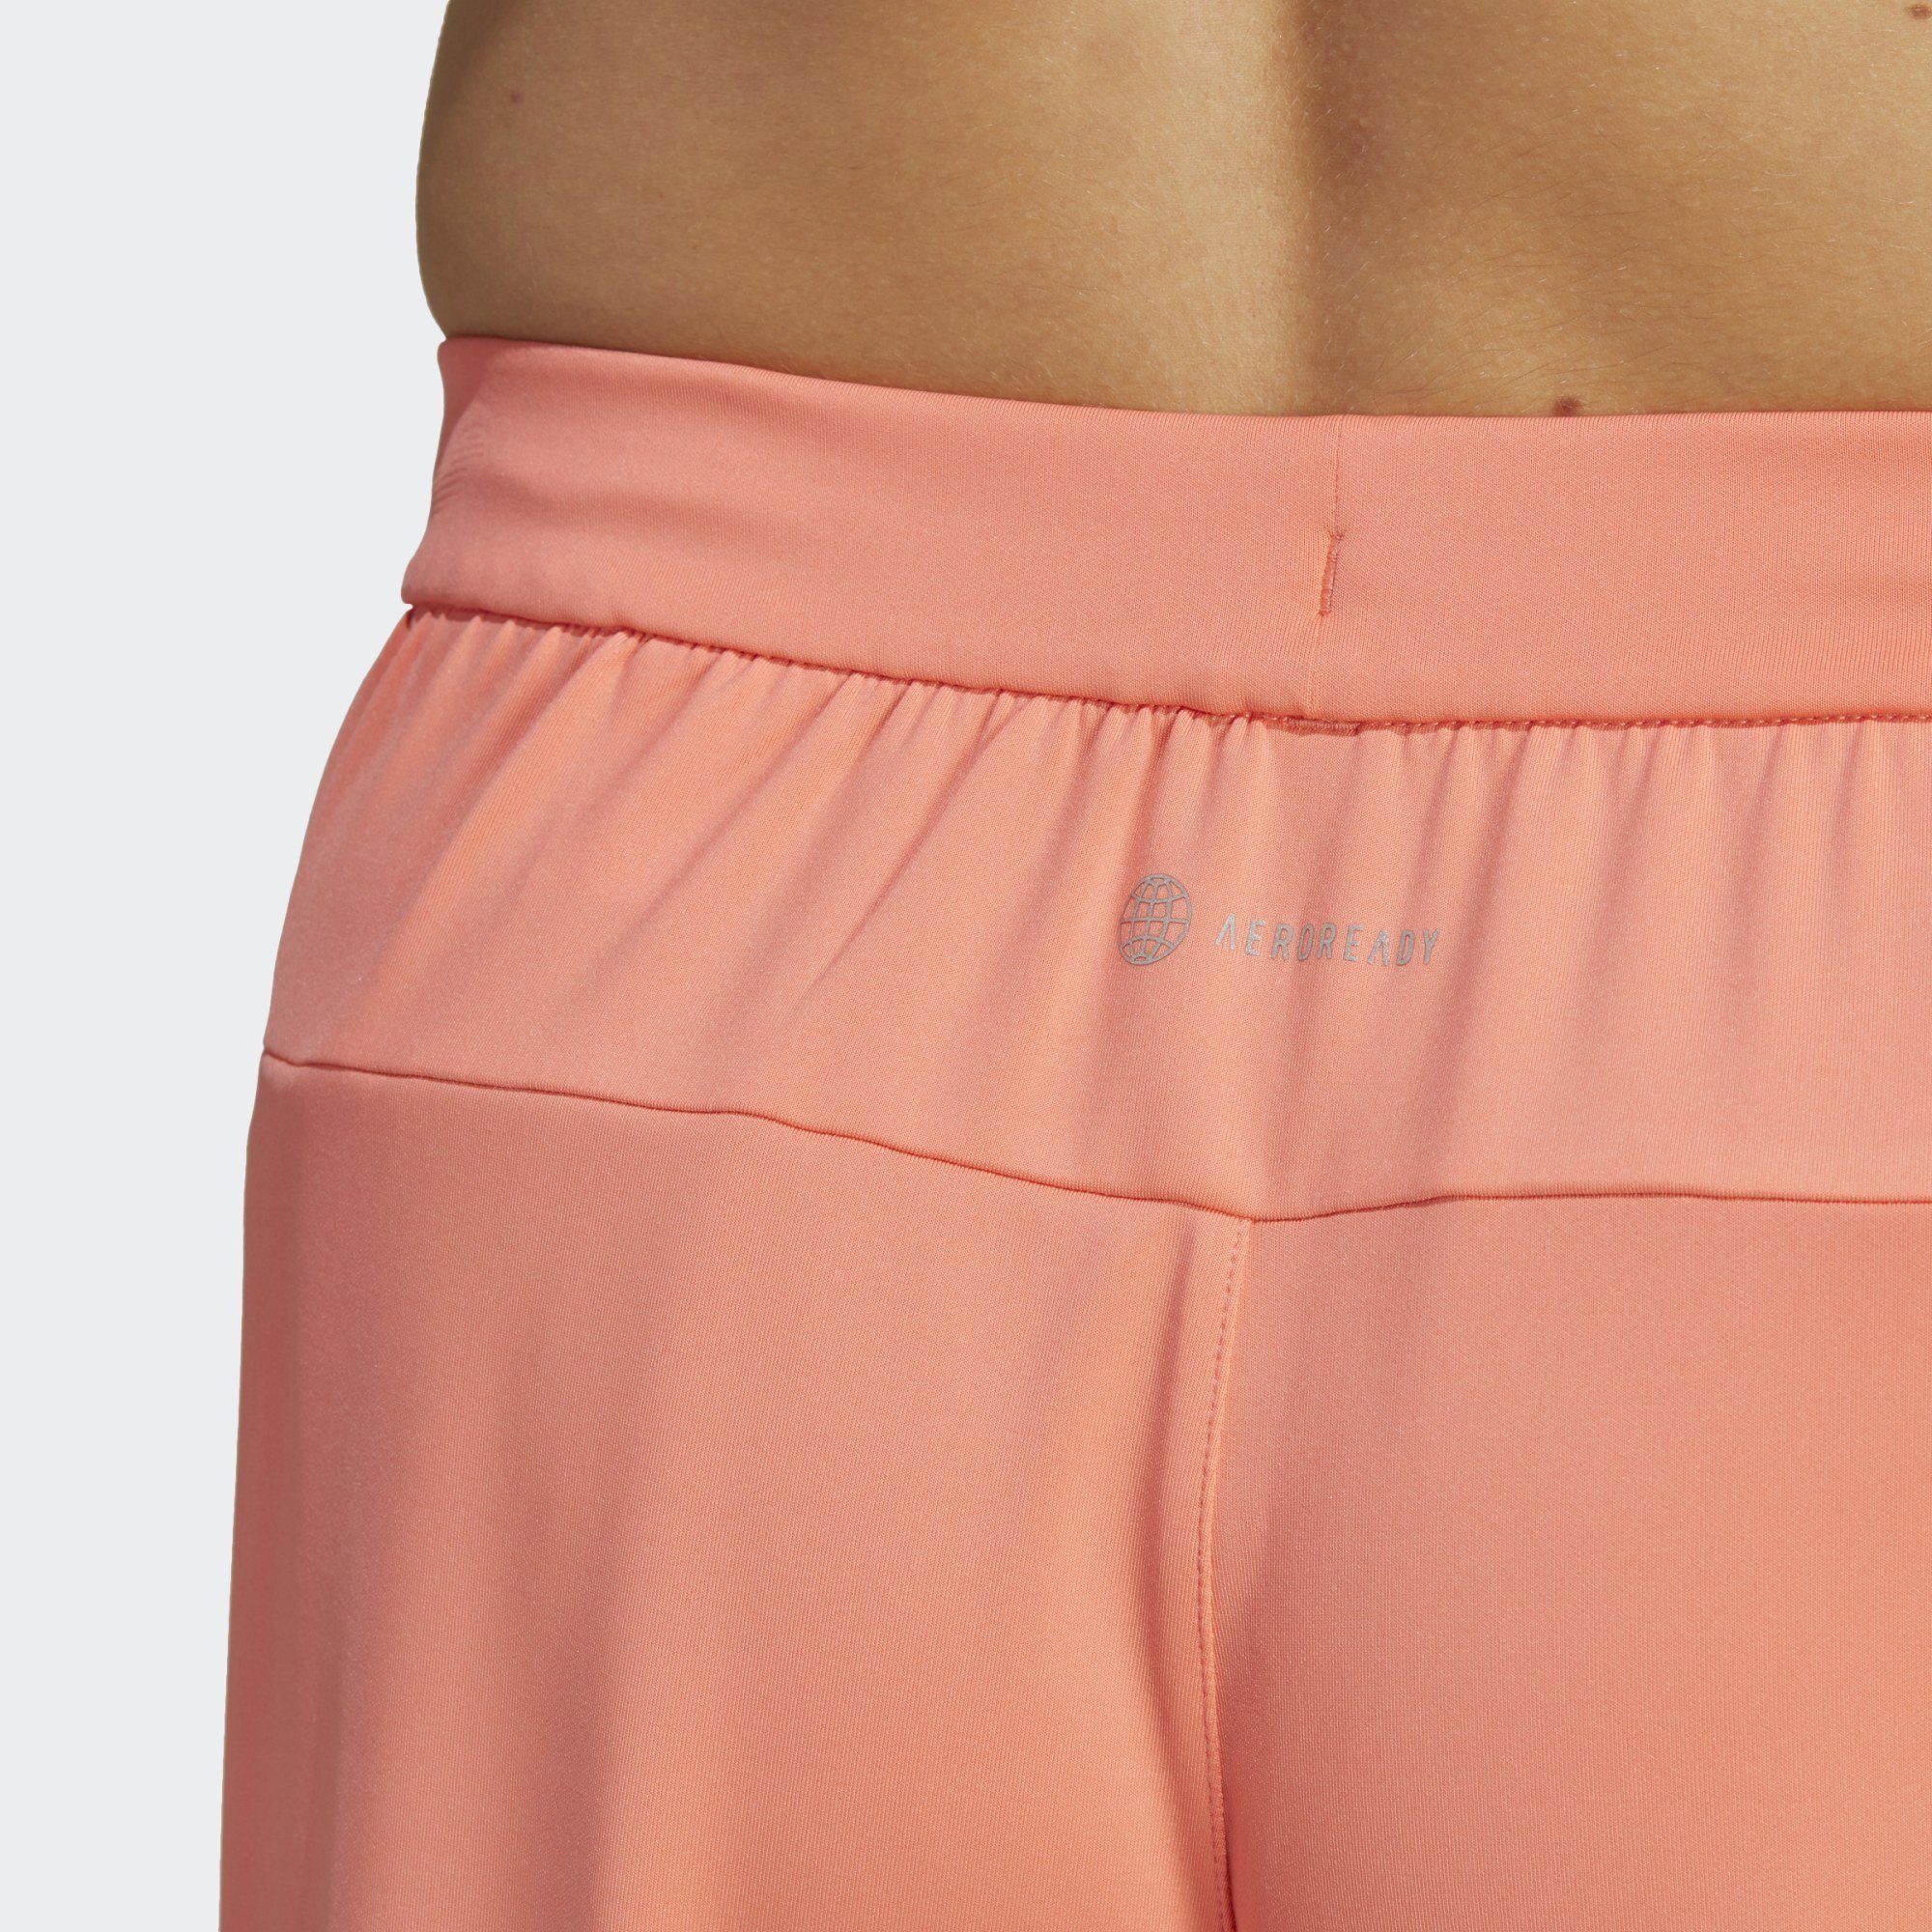 Performance SHORTS Fusion Coral TRAINING Funktionsshorts FOR adidas DESIGNED